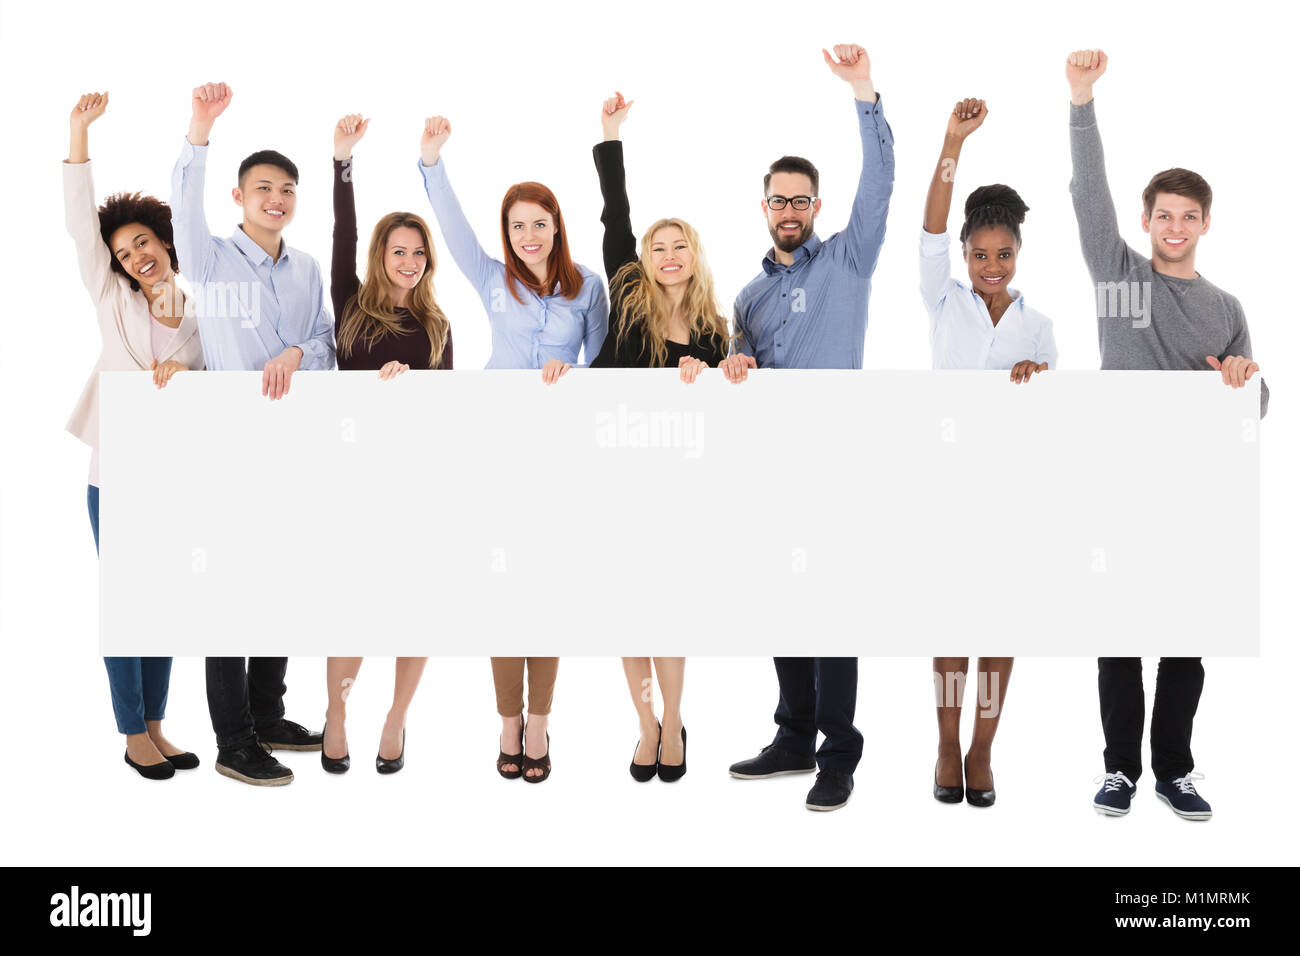 College Students With Billboard Raising Their Arms On White Background Stock Photo